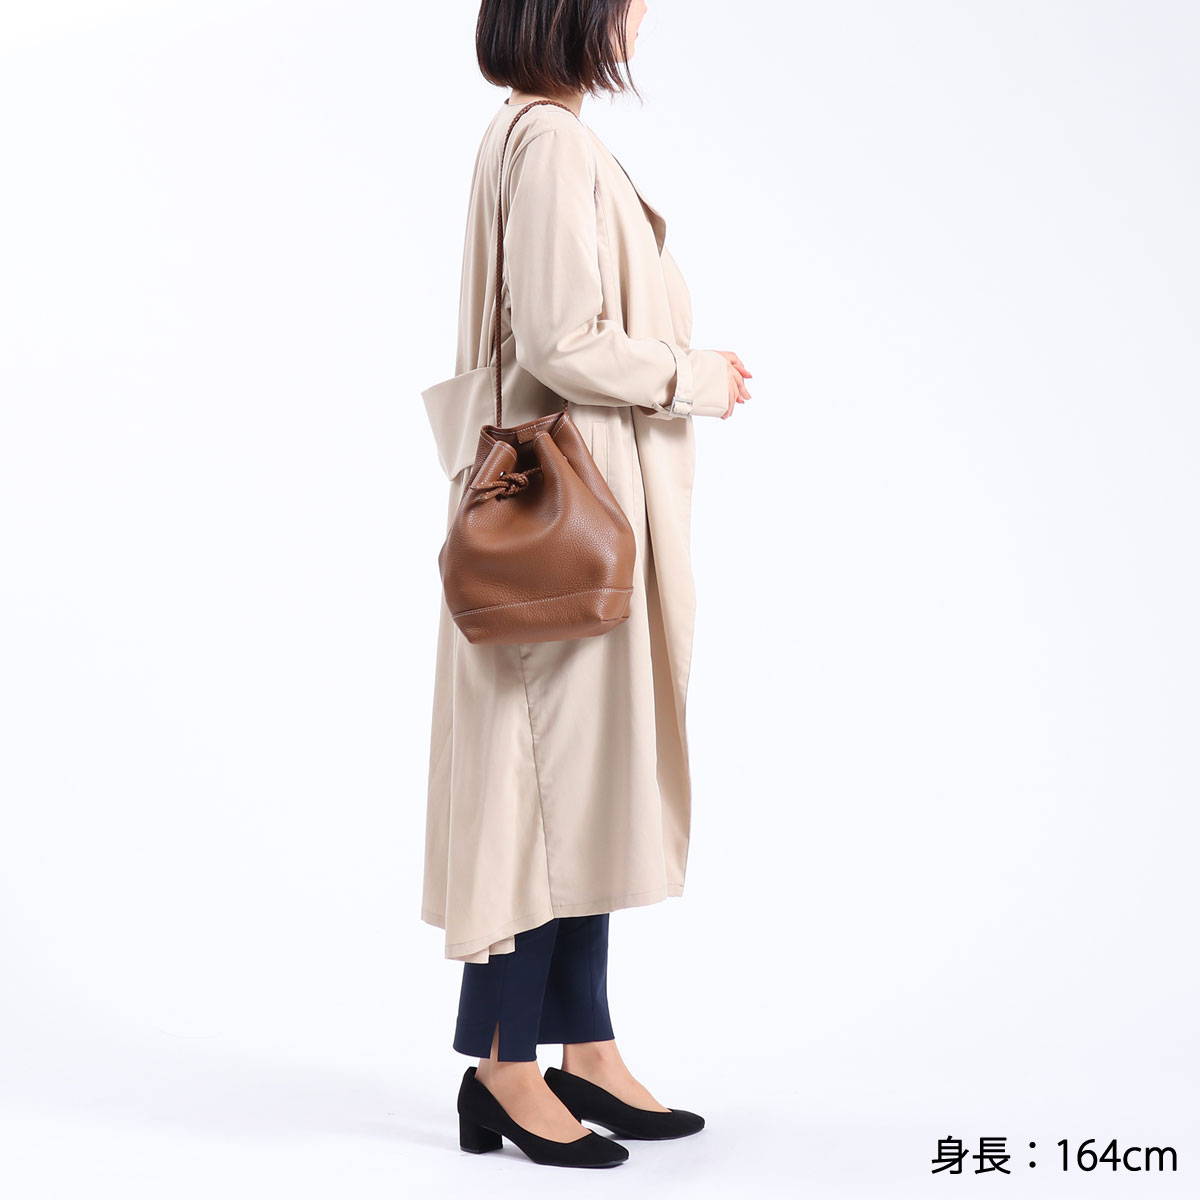 blancle blancle ME... : バッグ・雑貨 : ブランクレ バッグ 限定品新品